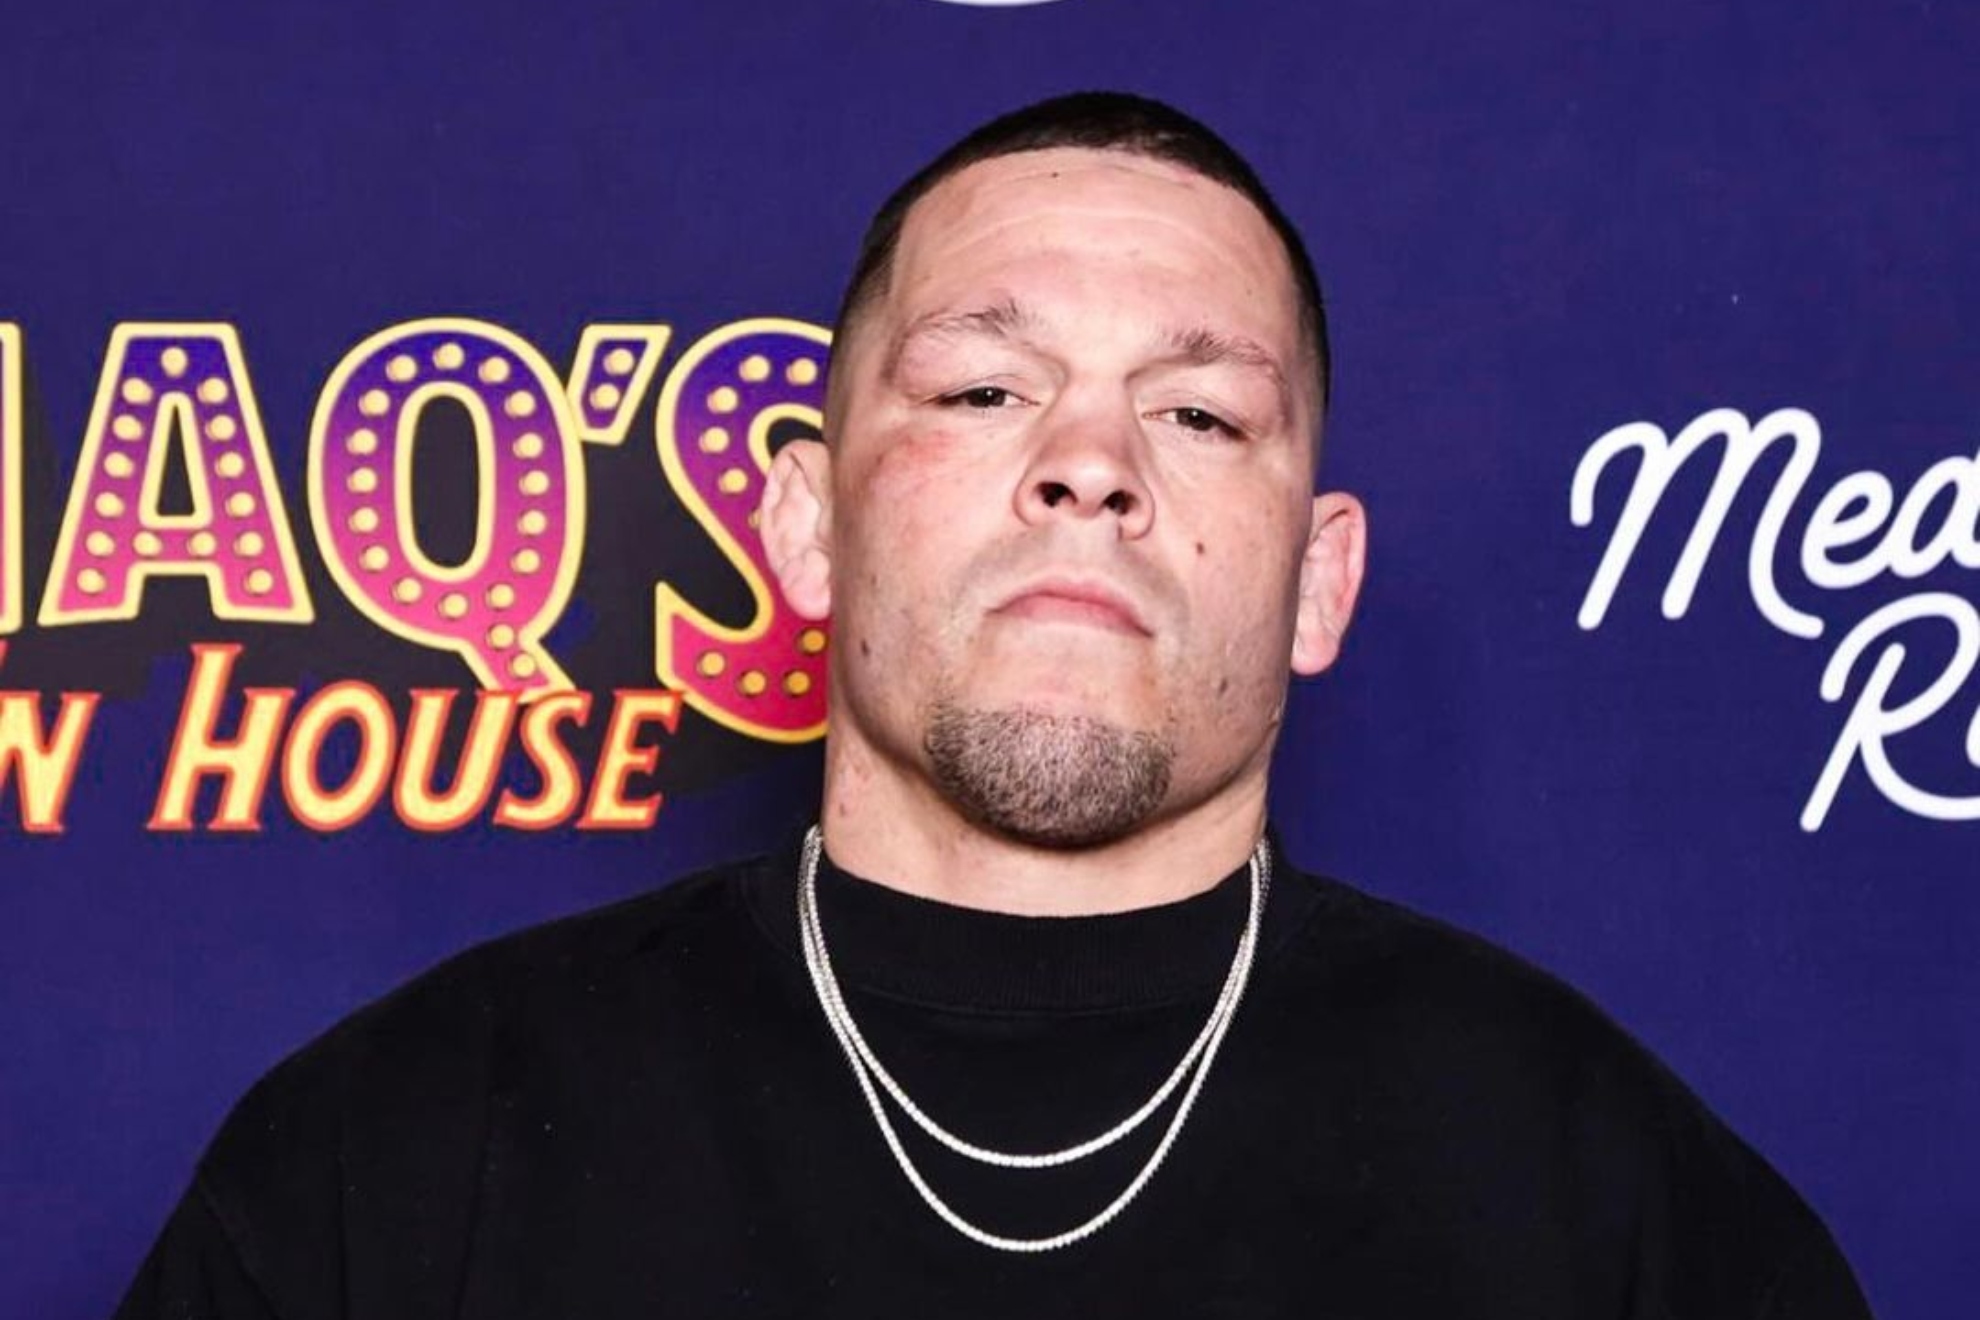 Nate Diaz sued for alleged assault during New Orleans street brawl